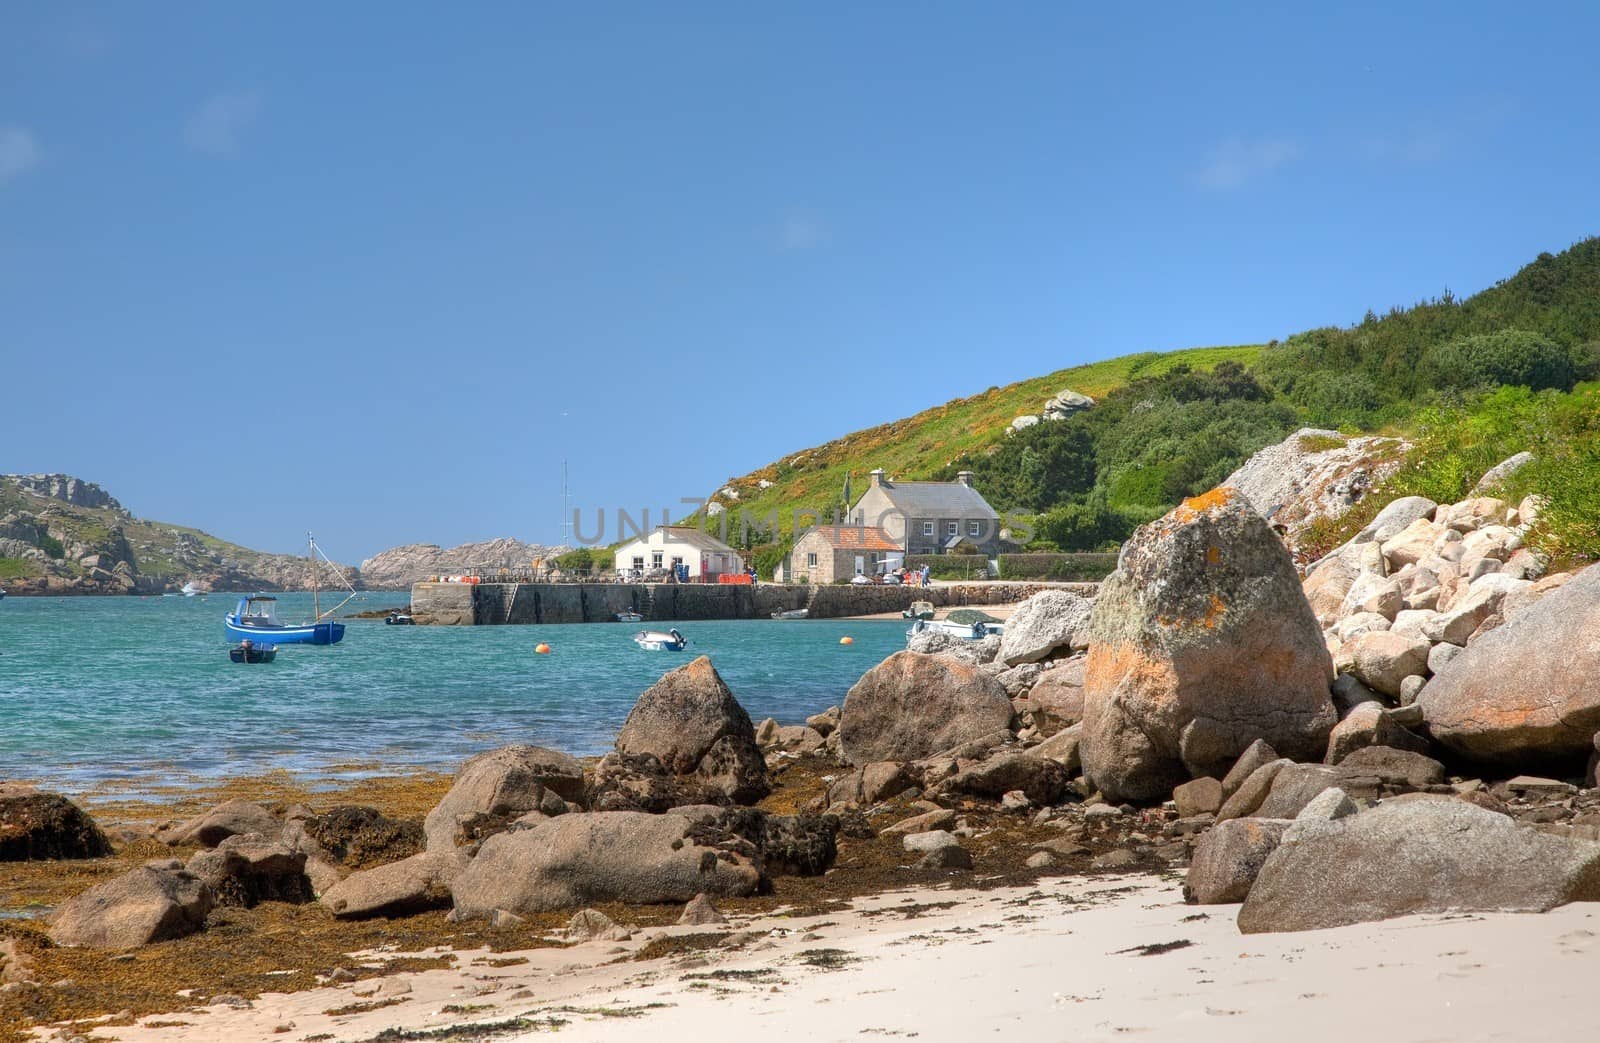 Looking towards the quay at New Grimsby, Tresco, Isles of Scilly, Cornwall, England.